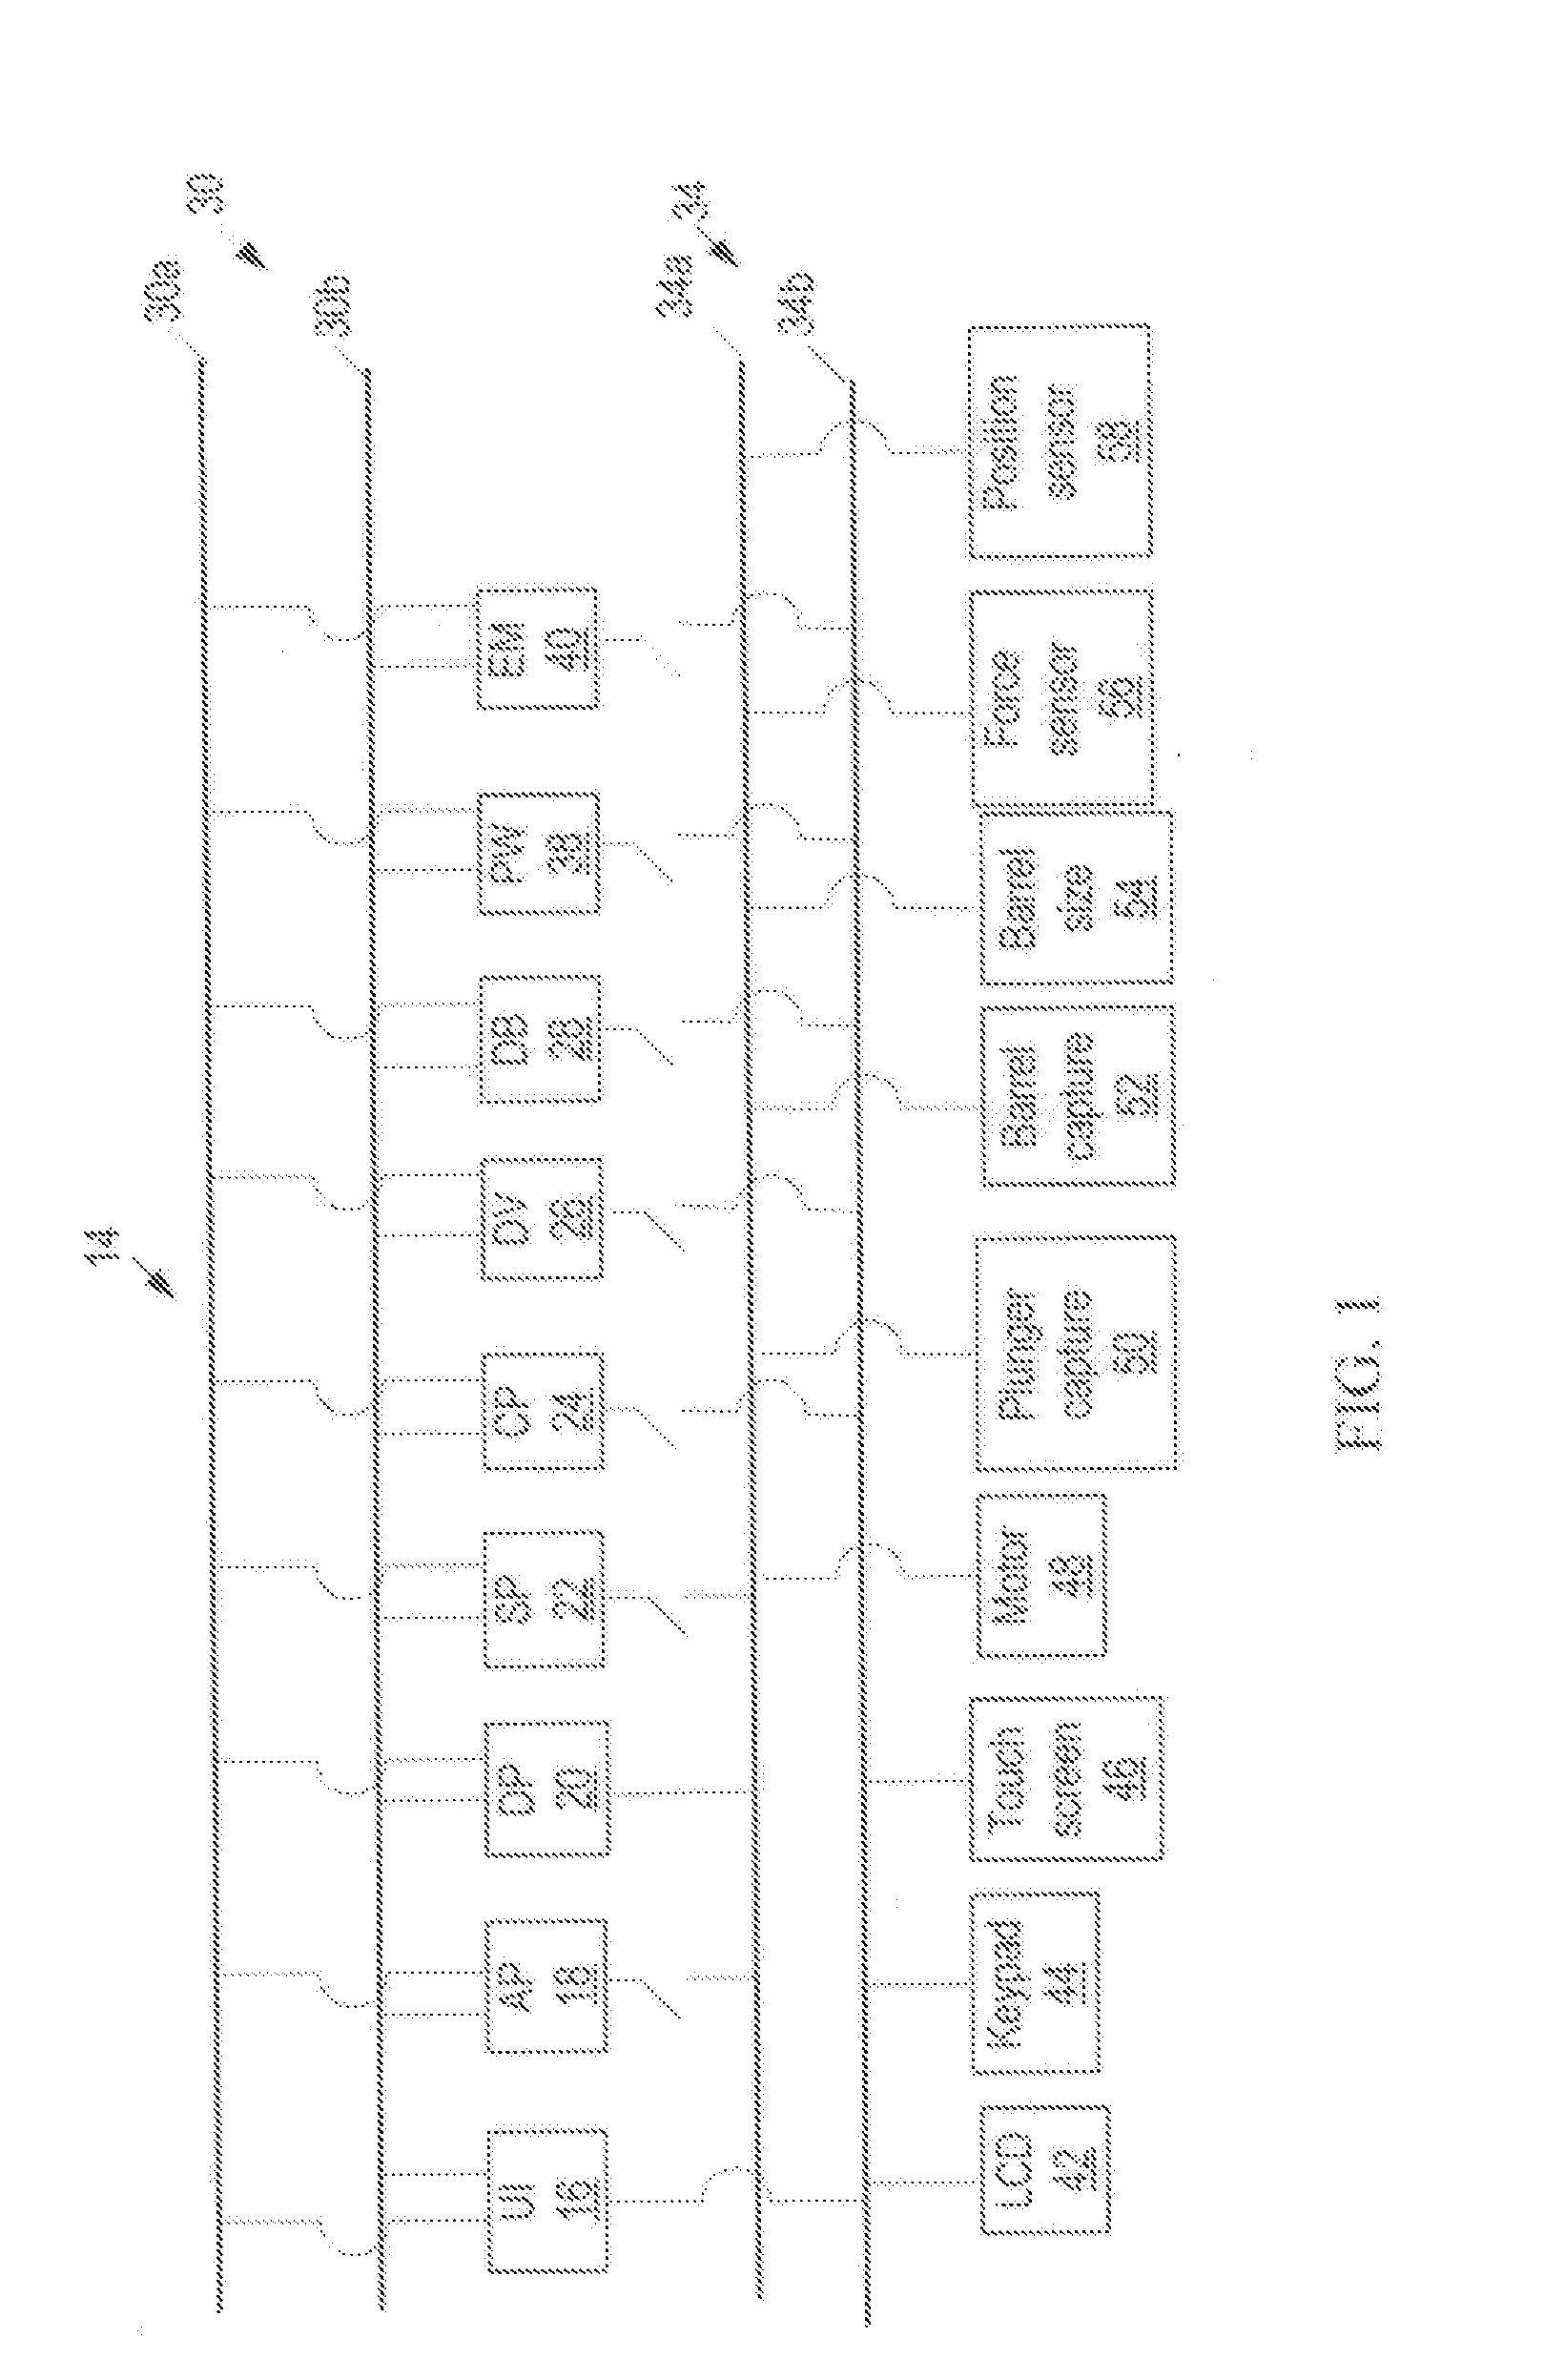 Distributed processor configuration for use in infusion pumps